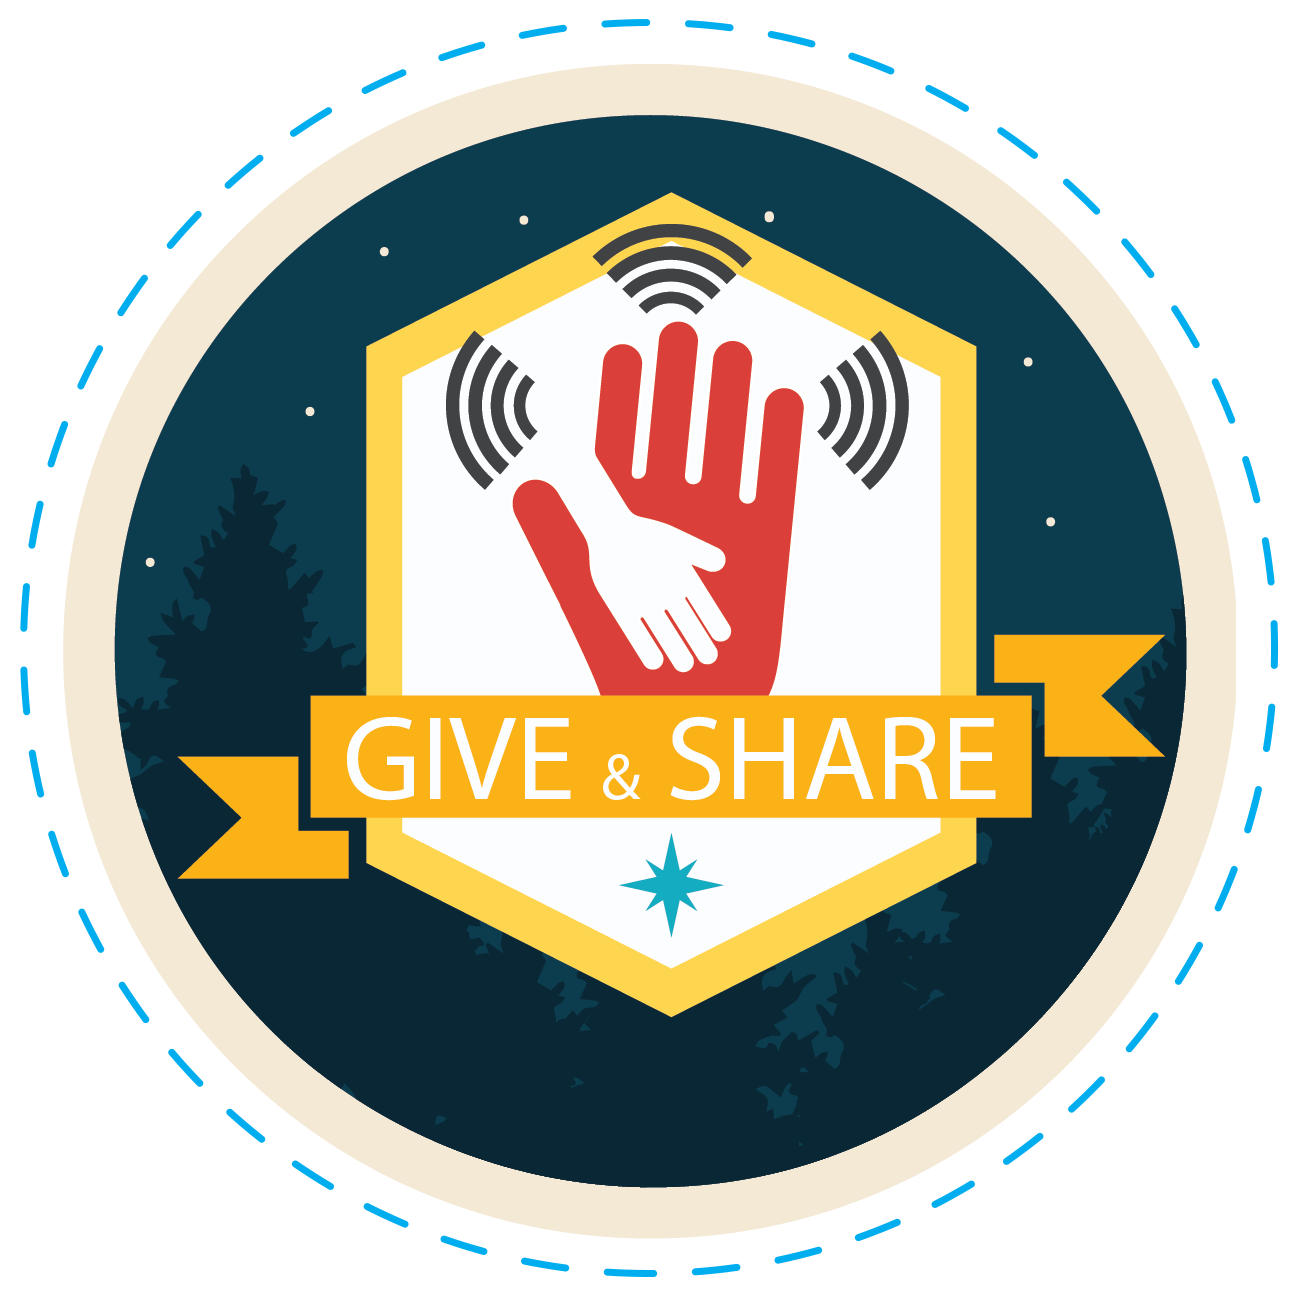 Give & Share